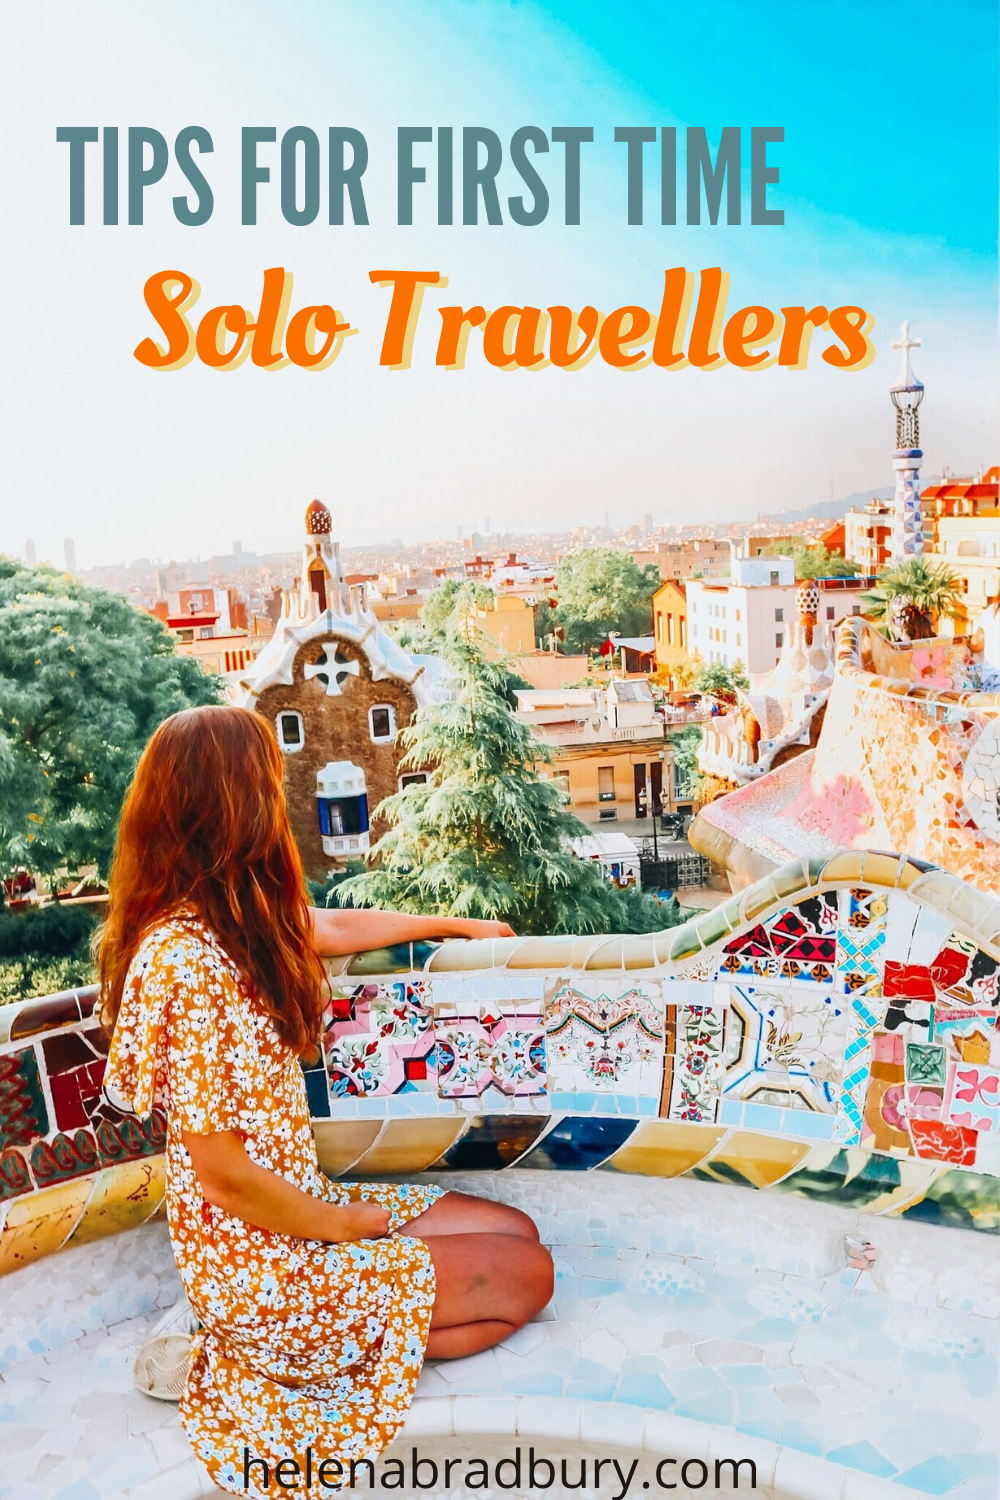 How to travel by yourself: tips for first time solo travellers | Helena Bradbury travel blog | solo travel tips | solo travel tips articles | female solo travel tips | solo travel tips wanderlust | solo travel inspiration | solo travel first time | …